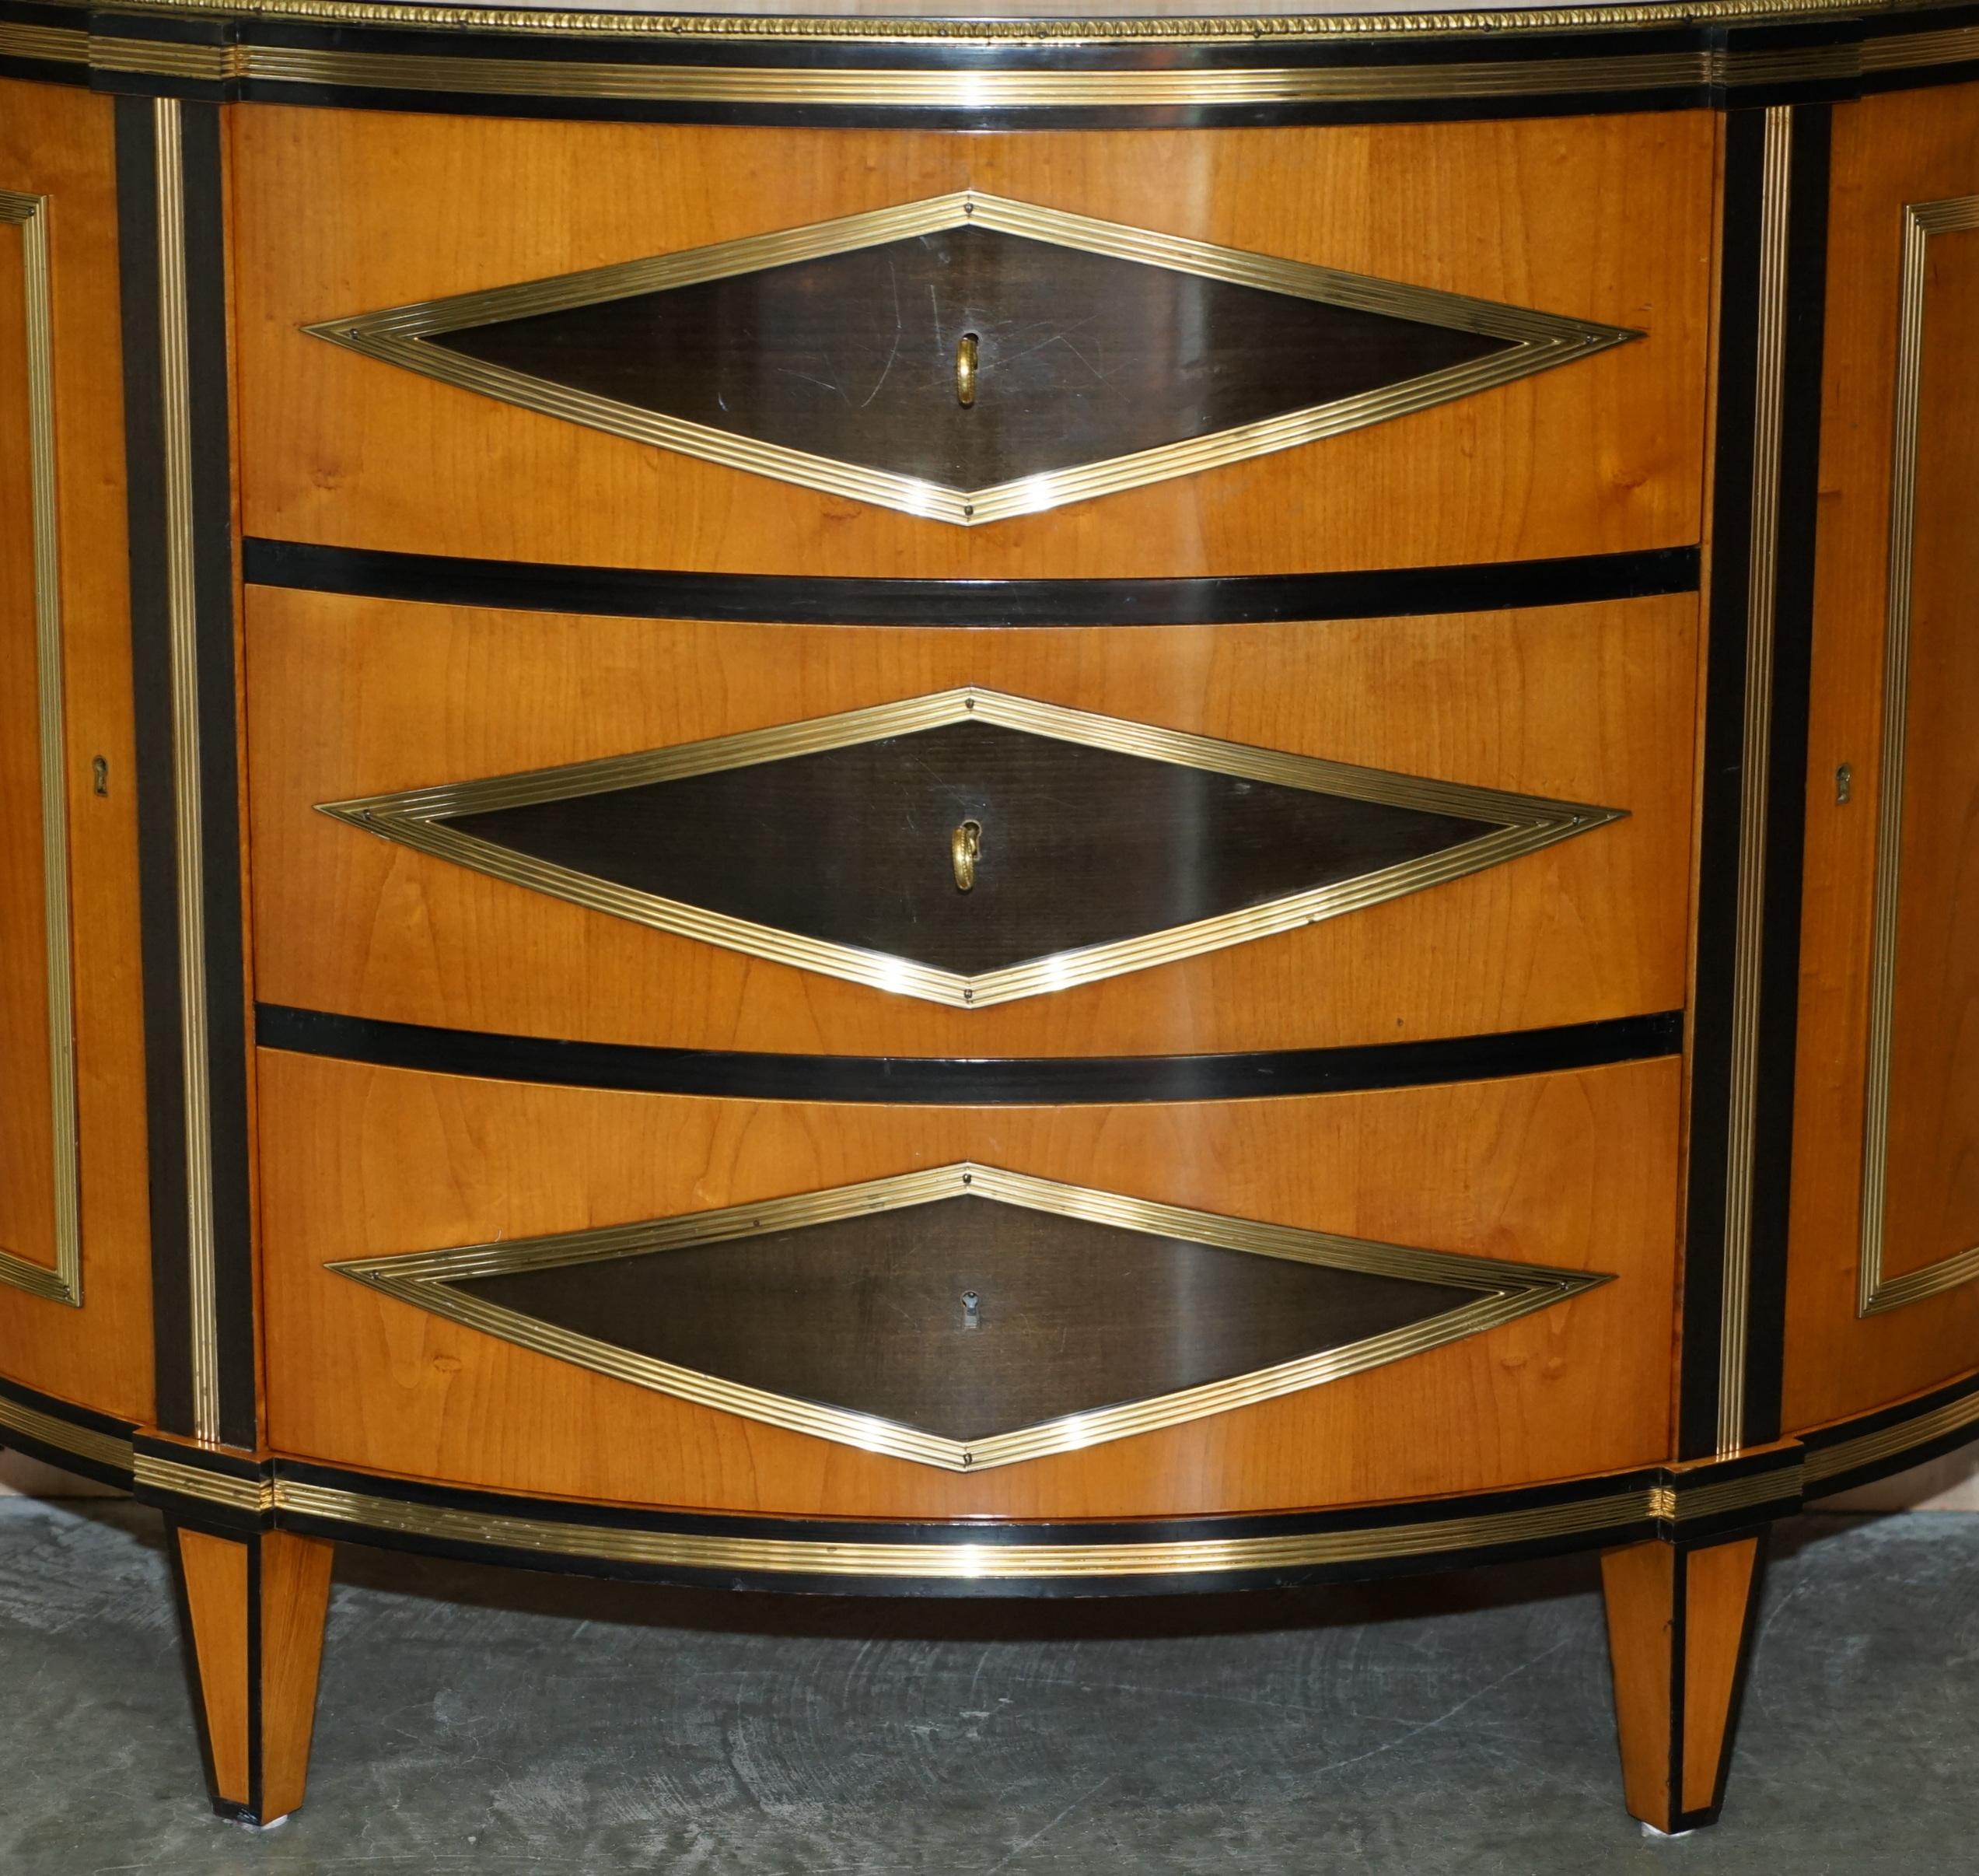 20th Century SATINWOOD & BRASS COLOMBO MOBILI ITALY DEMI LUNE SiDEBOARD CHEST OF DRAWERS For Sale